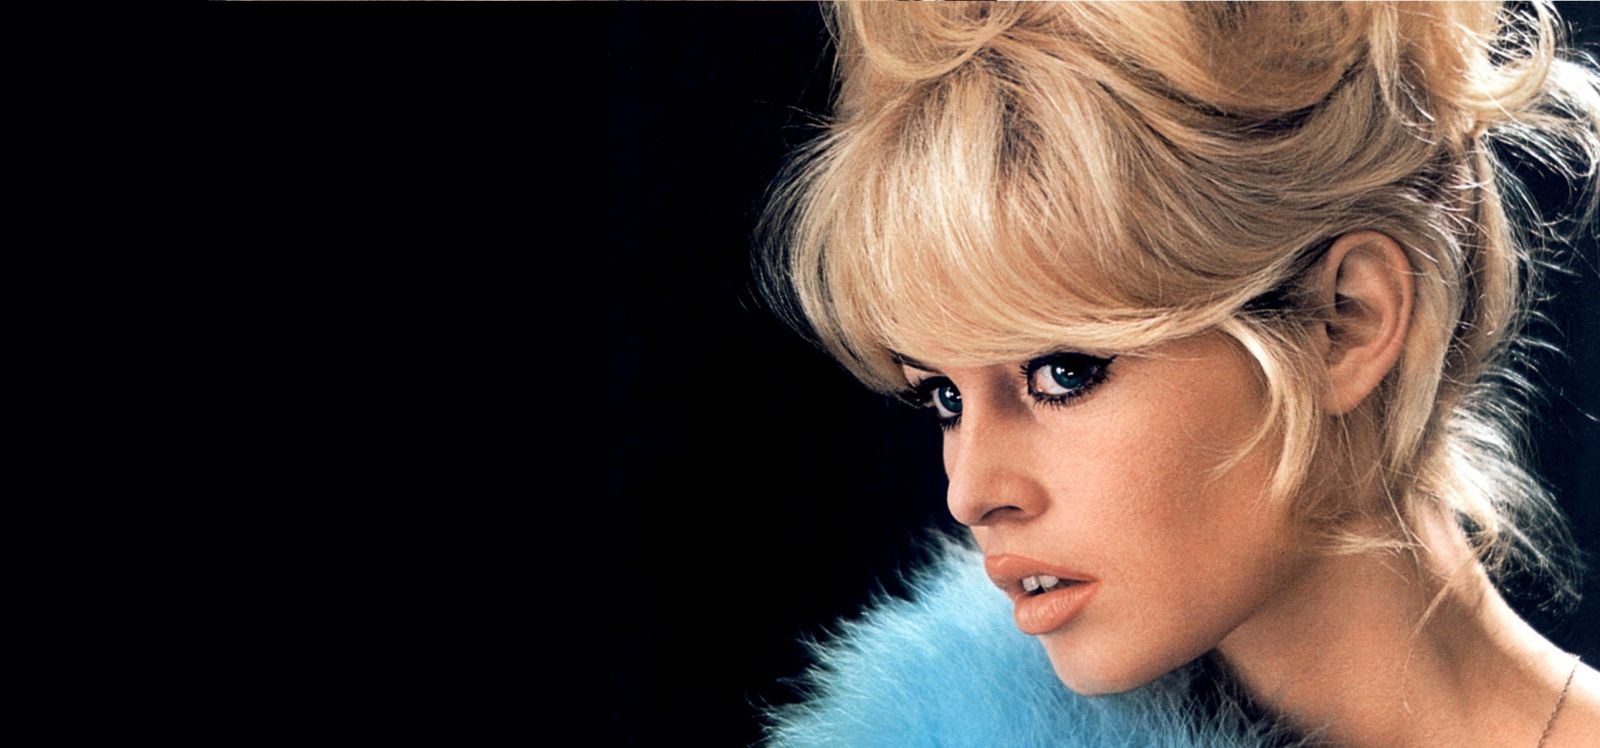 \"I have the courage of my convictions.\"

Happy birthday to the beautiful Brigitte Bardot  